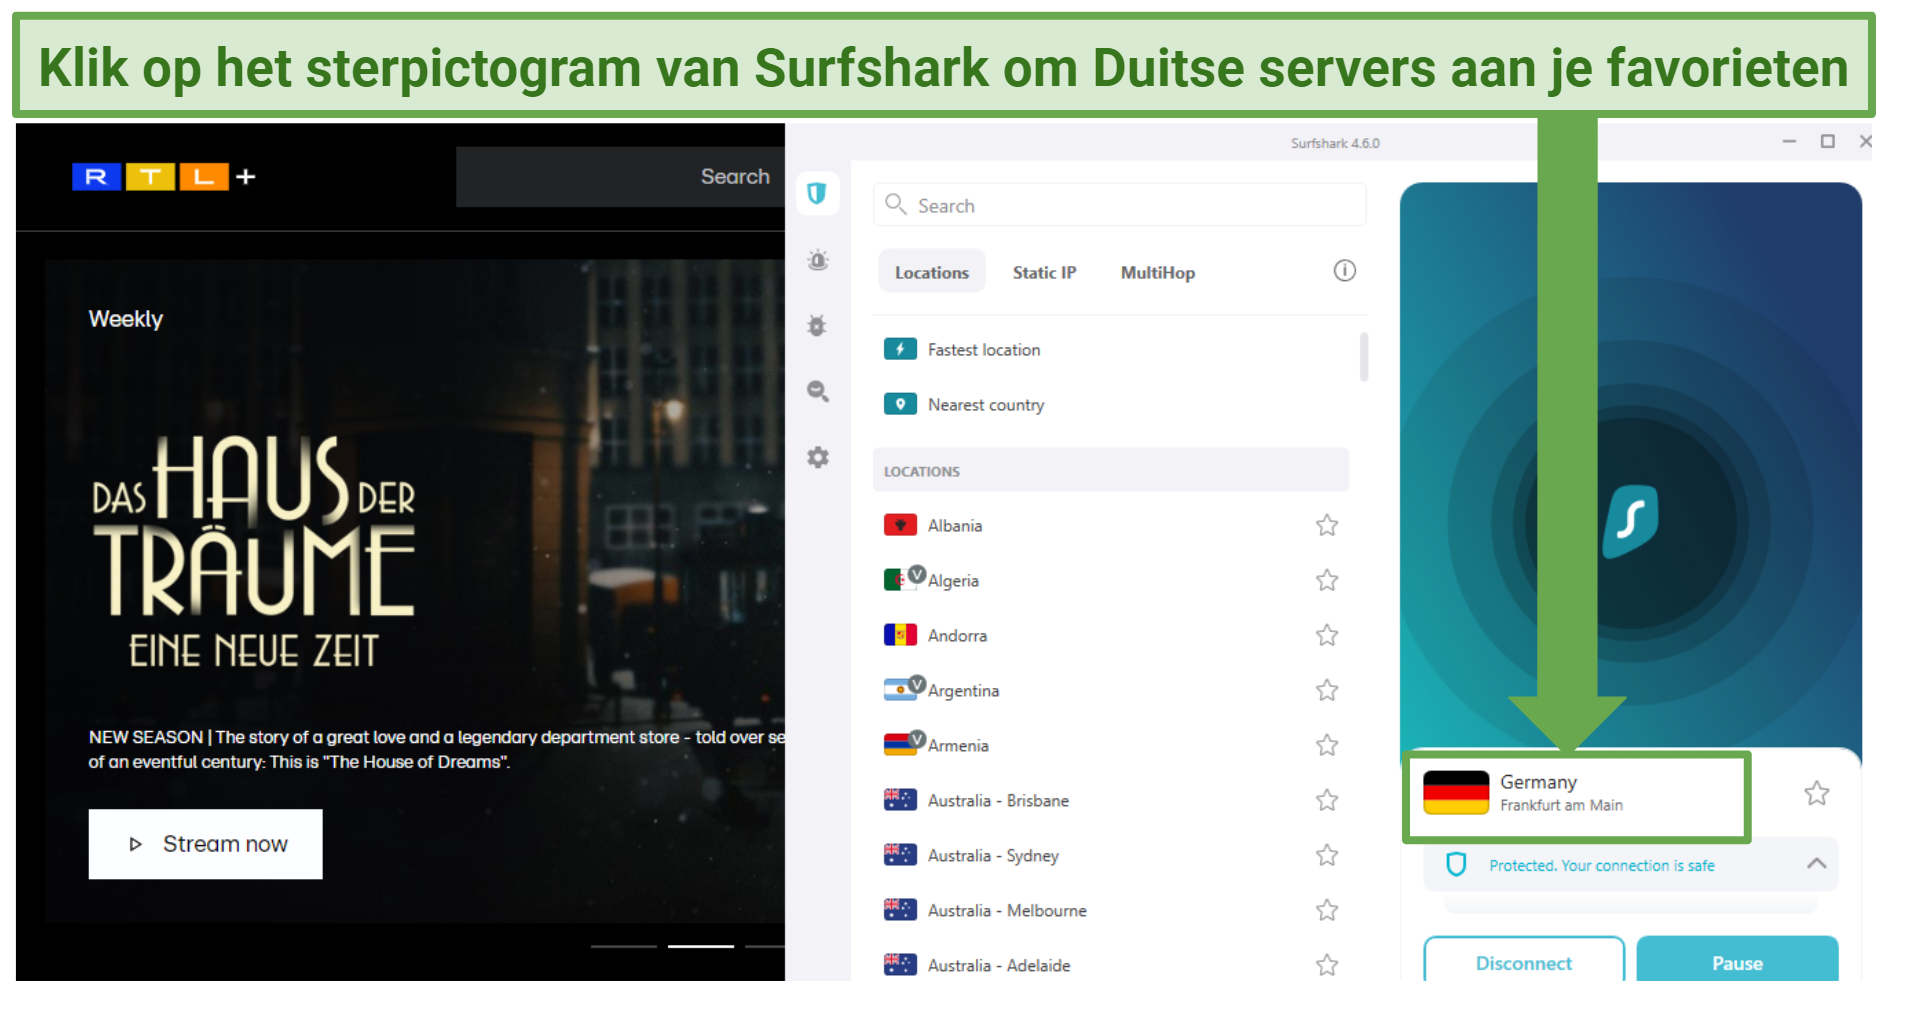 A screenshot of RTL+ with Haus Traume showing while connected to Surfshark German servers